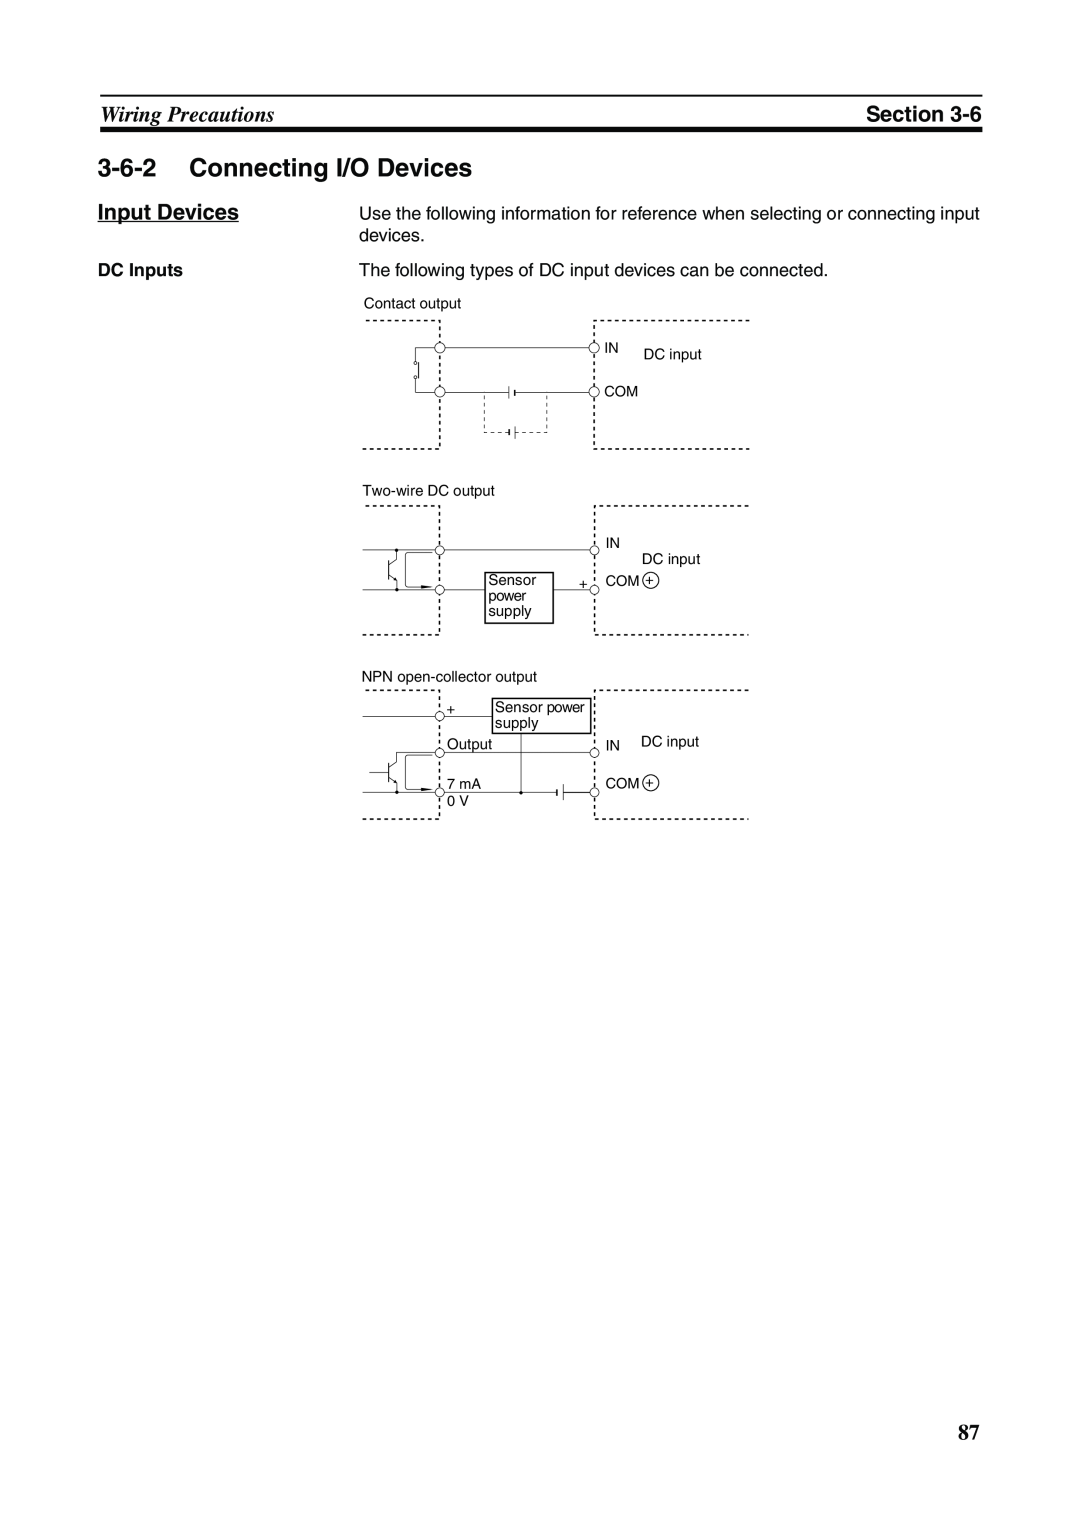 Omron FQM1-MMP21, FQM1-CM001, FQM1-MMA21 3-6-2Connecting I/O Devices, Wiring Precautions, Section, Input Devices, DC Inputs 